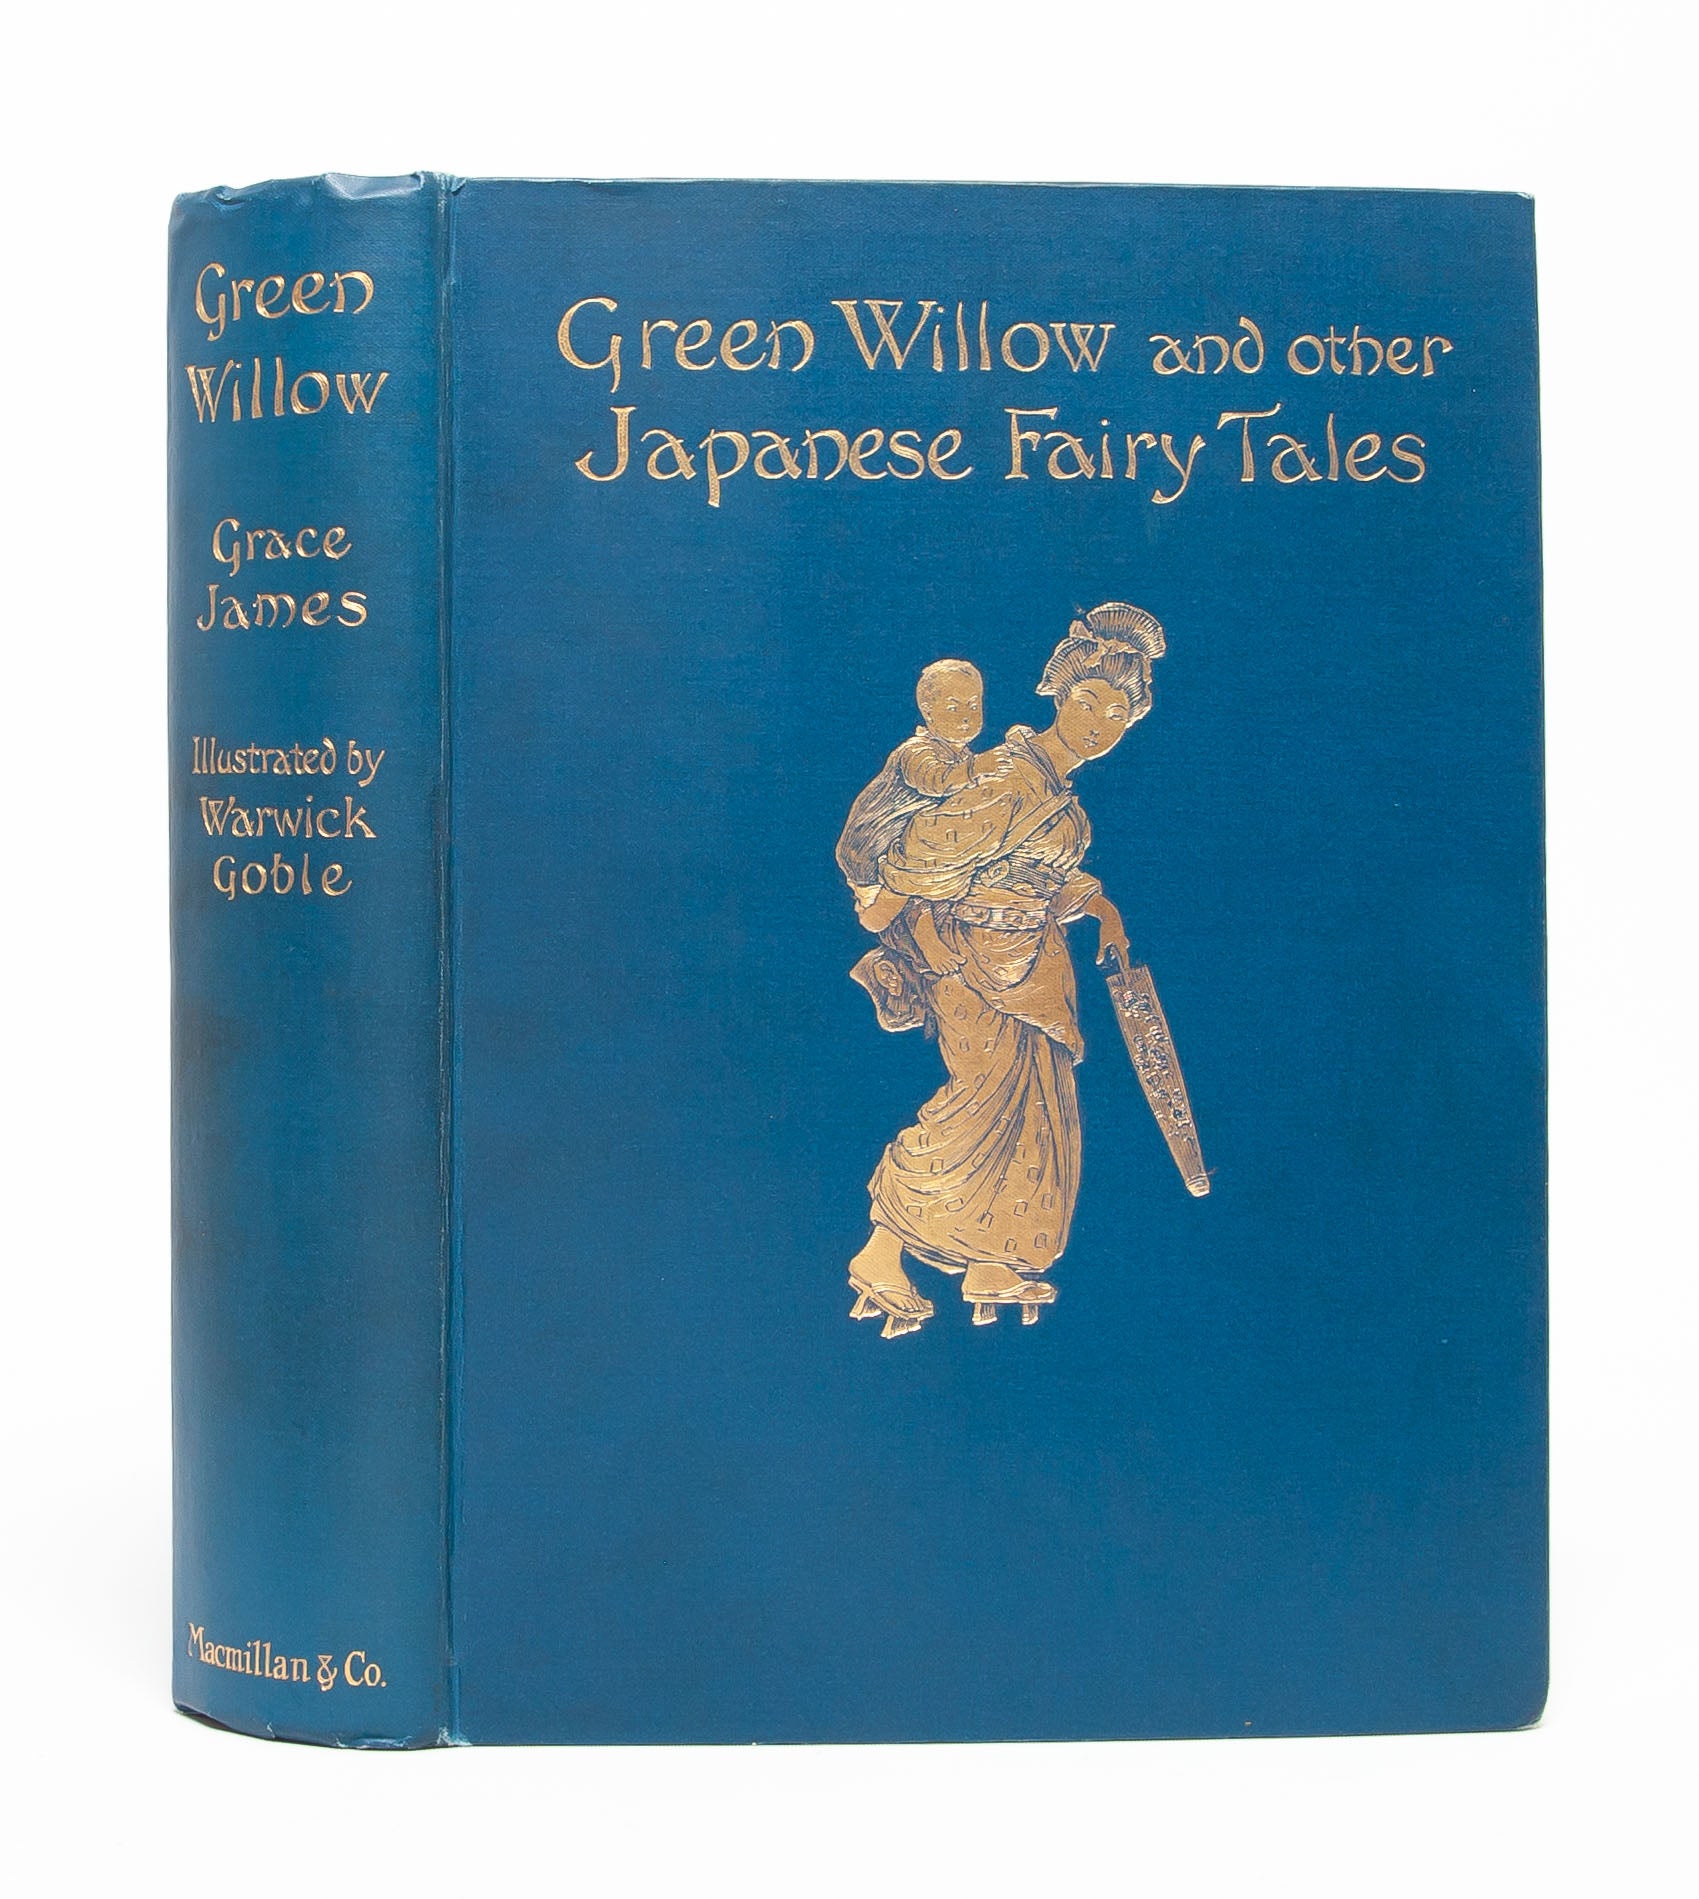 (Item #5818) Green Willow and other Japanese Fairy Tales. Grace James, Warwick Goble.